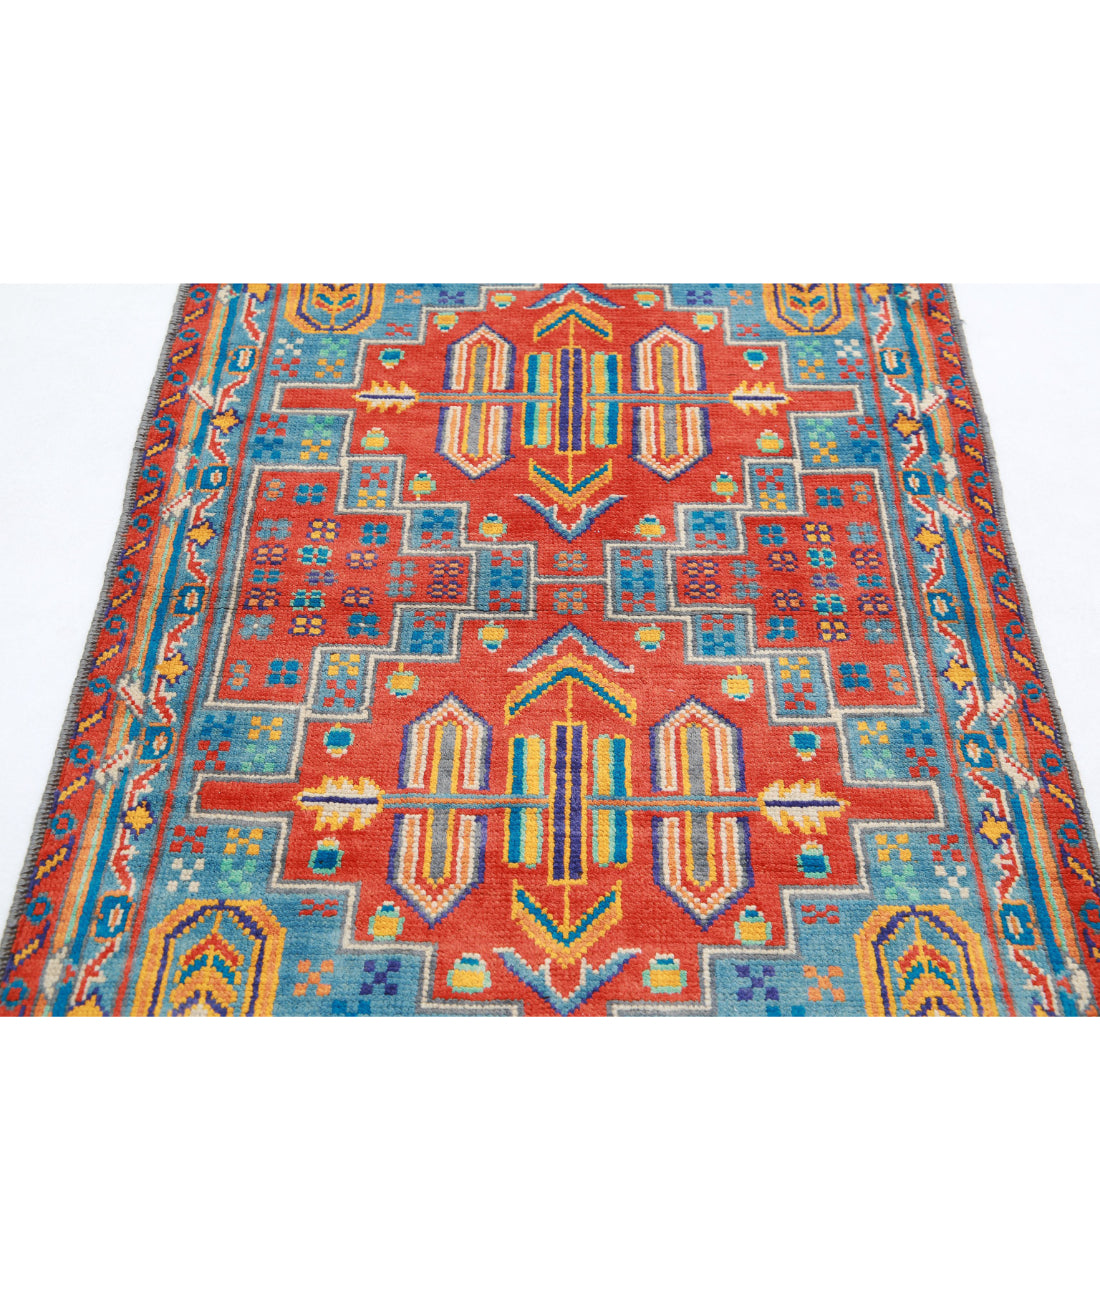 Revival 3'4'' X 4'10'' Hand-Knotted Wool Rug 3'4'' x 4'10'' (100 X 145) / Rust / Blue